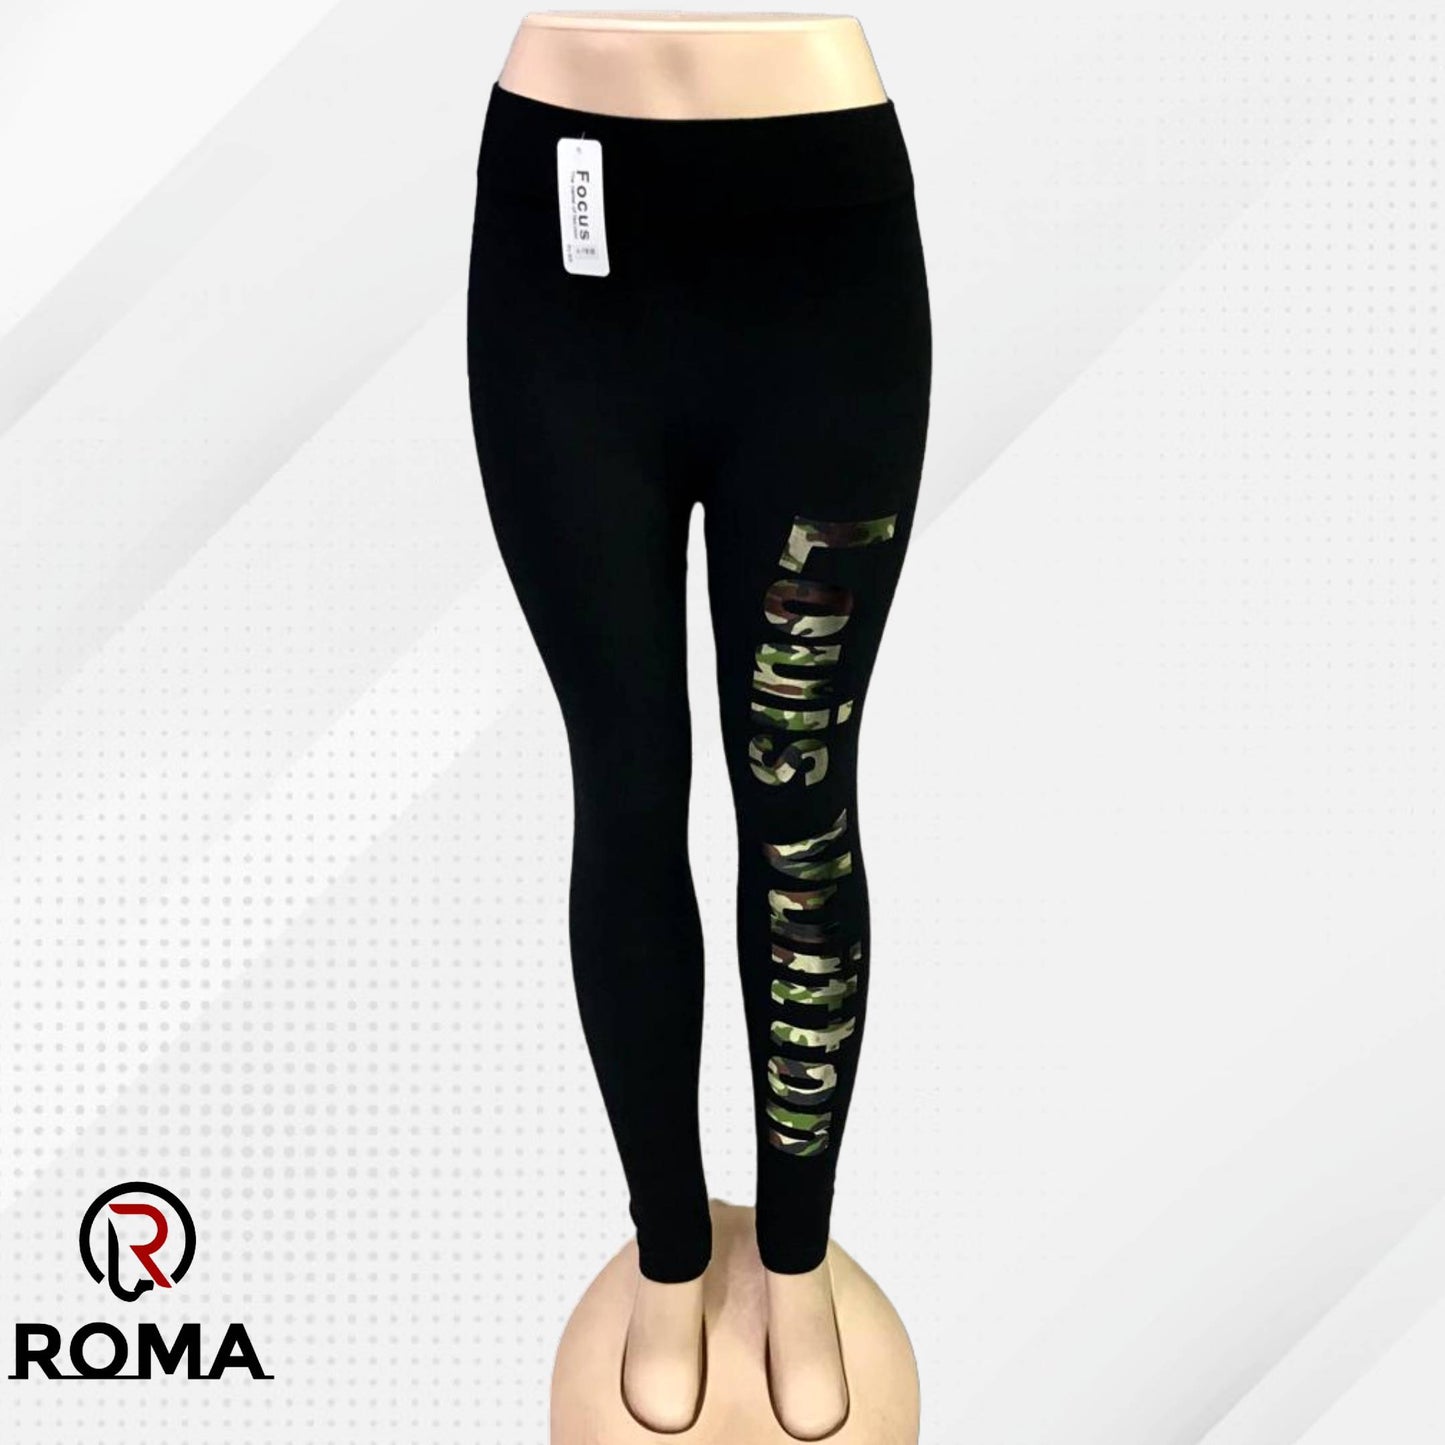 Commando High Rise Activewear Tights for Women - ROMA Store